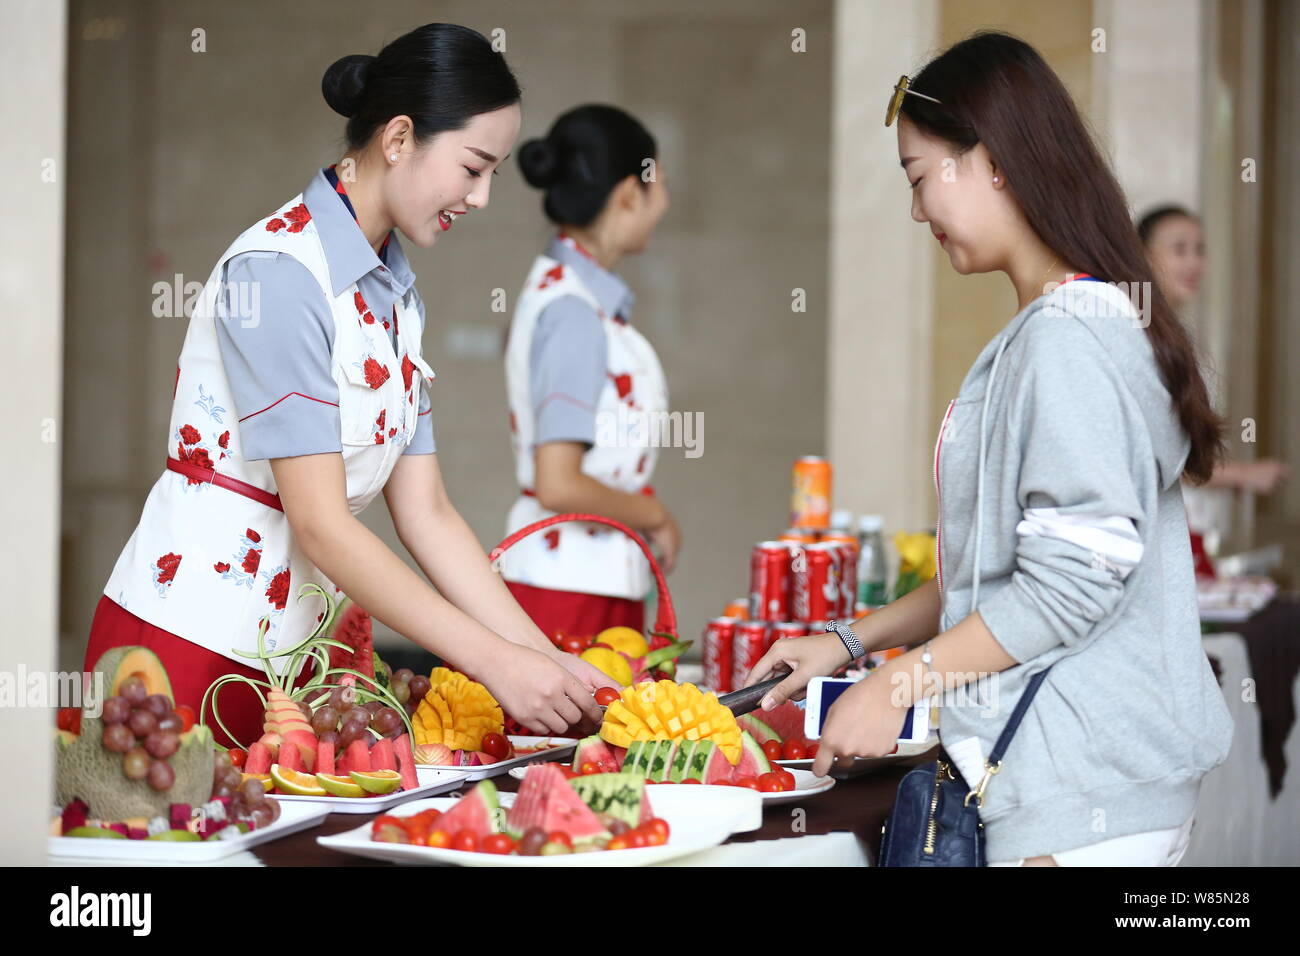 A college student dressed in a uniform of air hostess offers fruits to freshmen at Sichuan Southwest Vocational College of Civil Aviation in Chengdu c Stock Photo